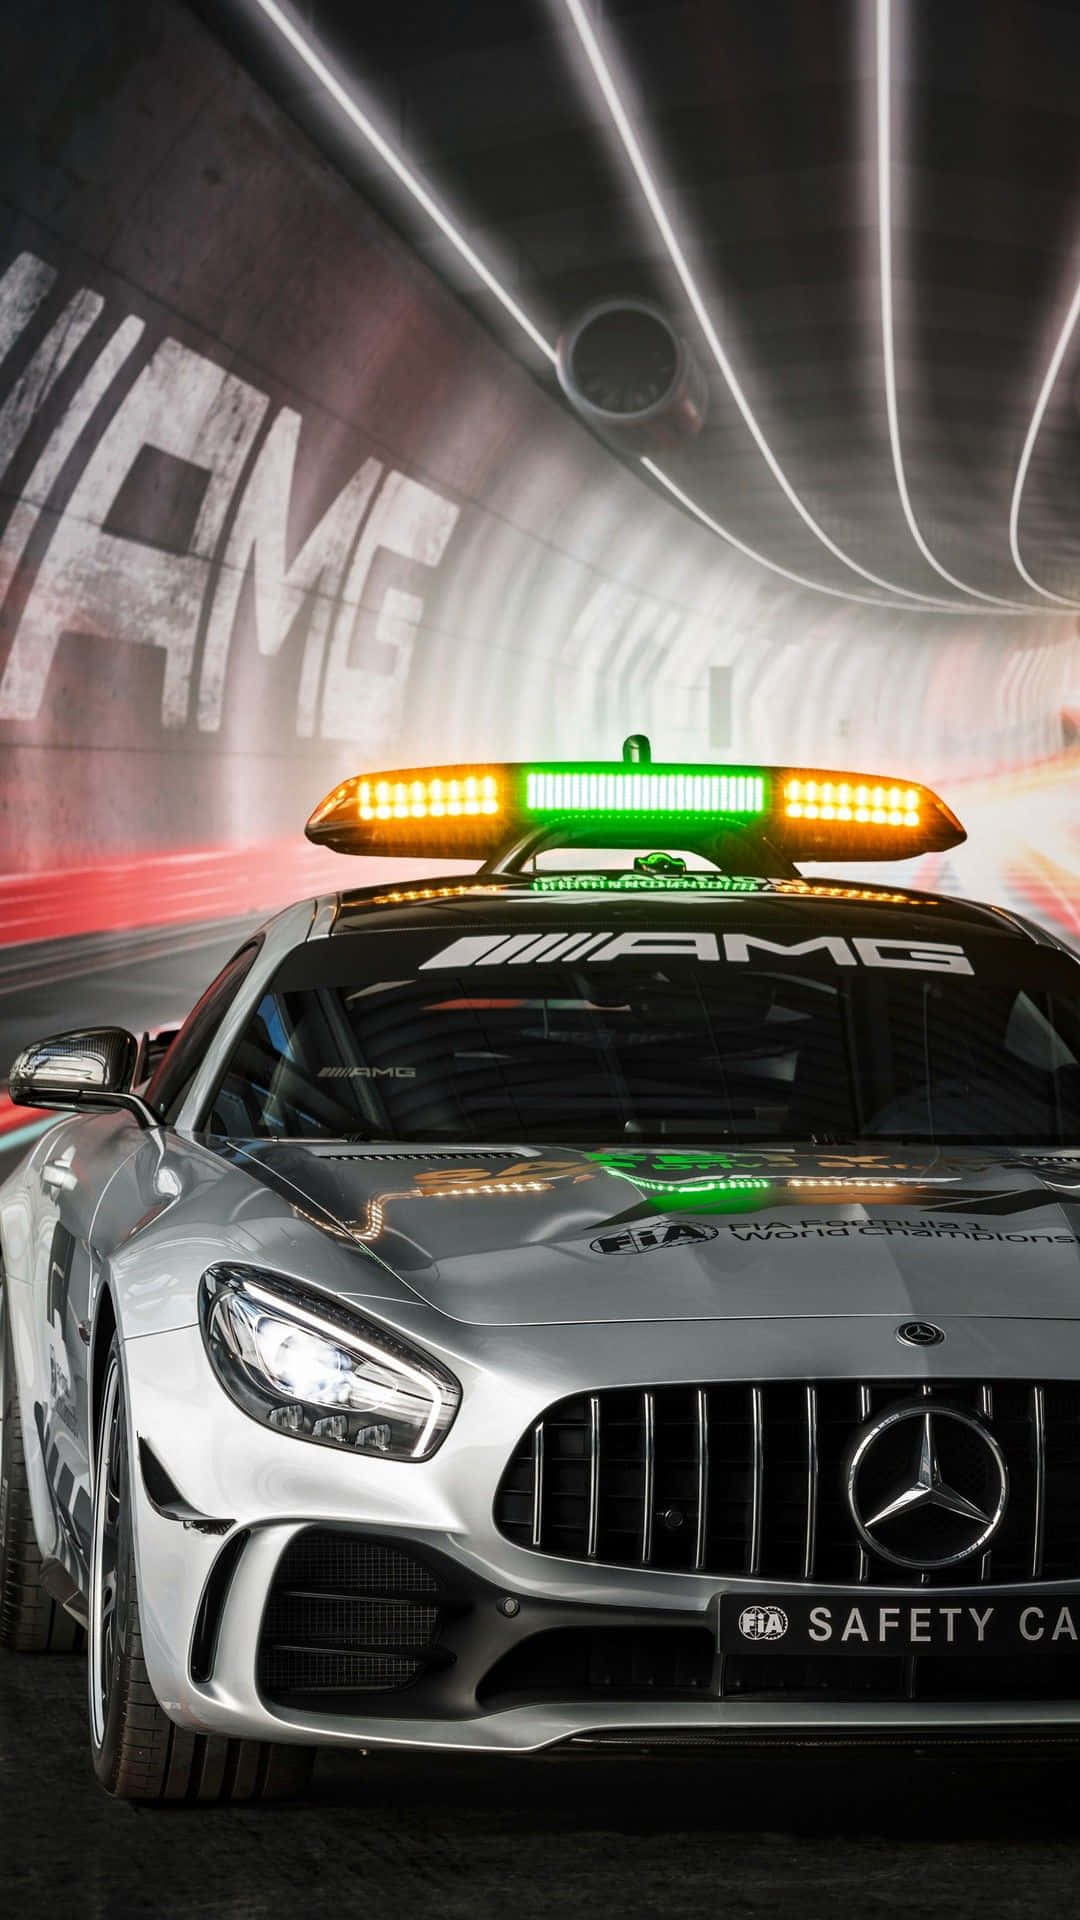 Mercedes Amg Gt-class Safety Car In A Tunnel